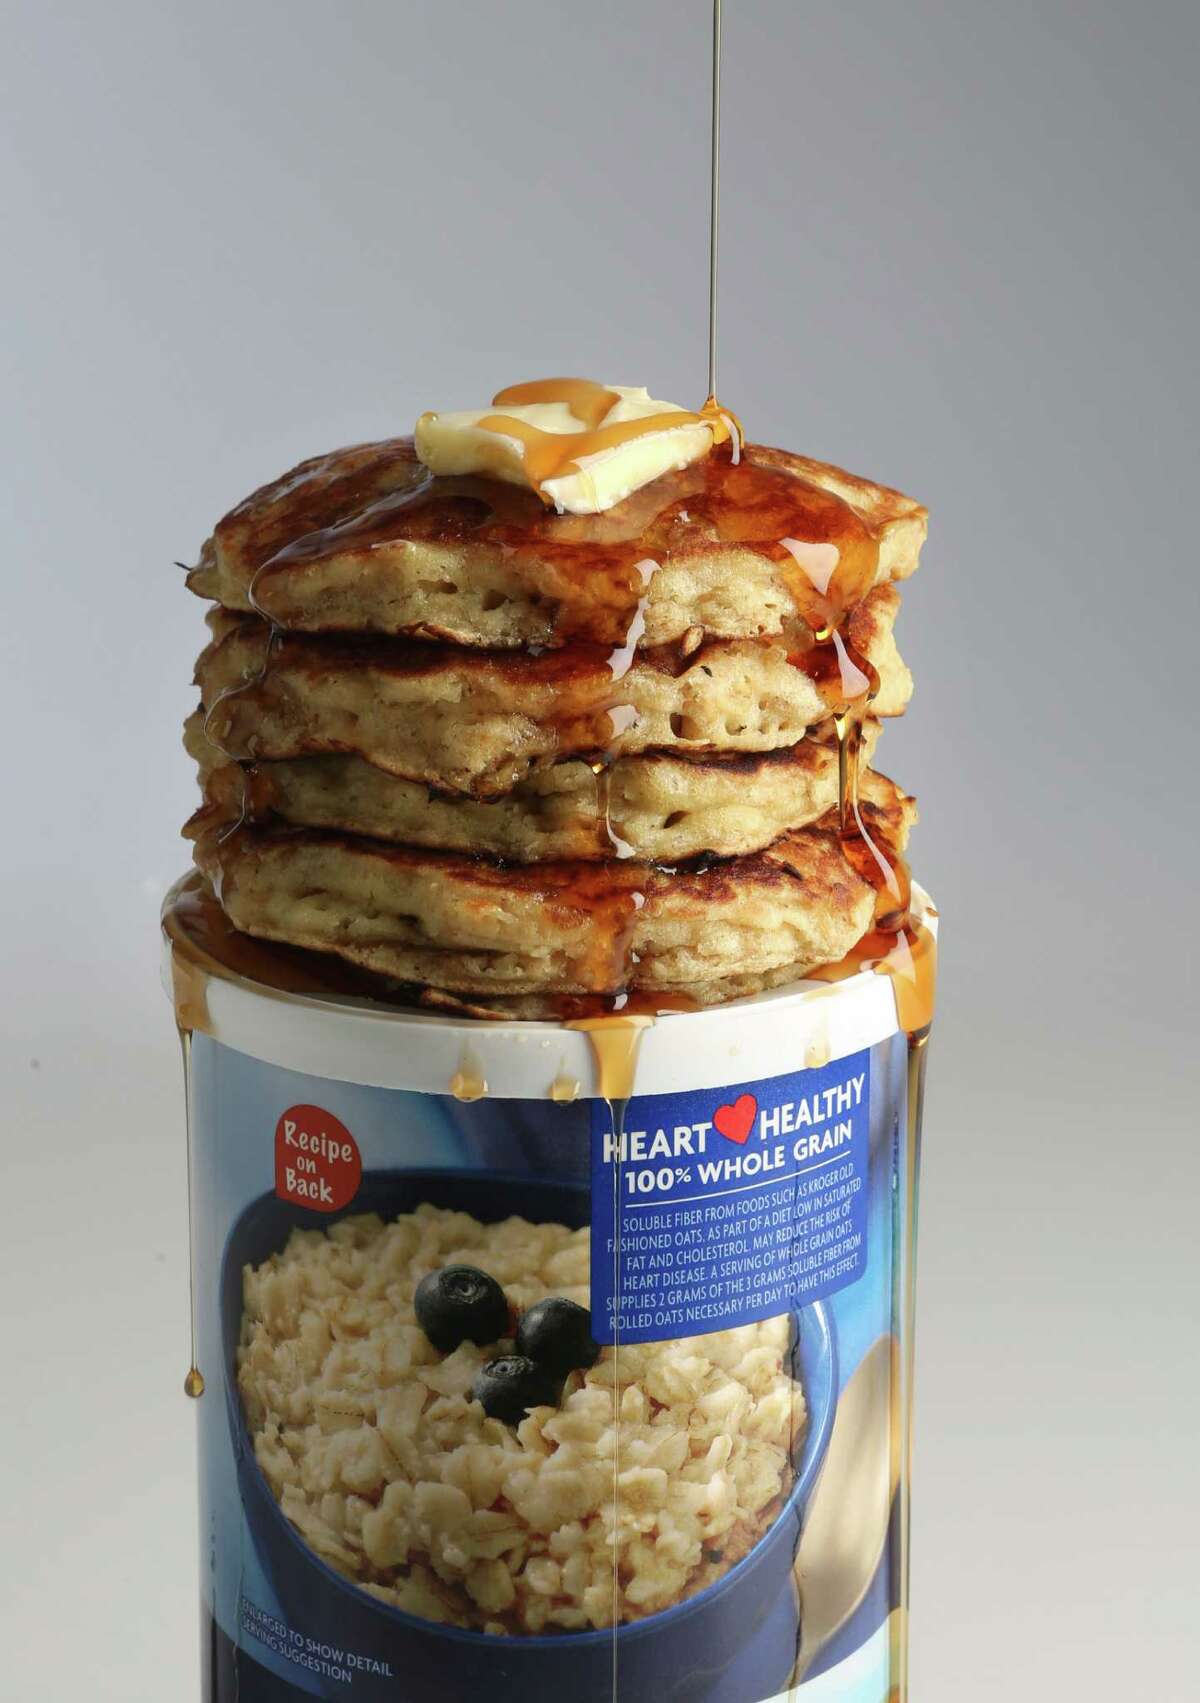 A stack of oatmeal pancakes featured in Kitchen to Kitchen column on Thursday, April 2, 2015, in Houston. ( Mayra Beltran / Houston Chronicle )